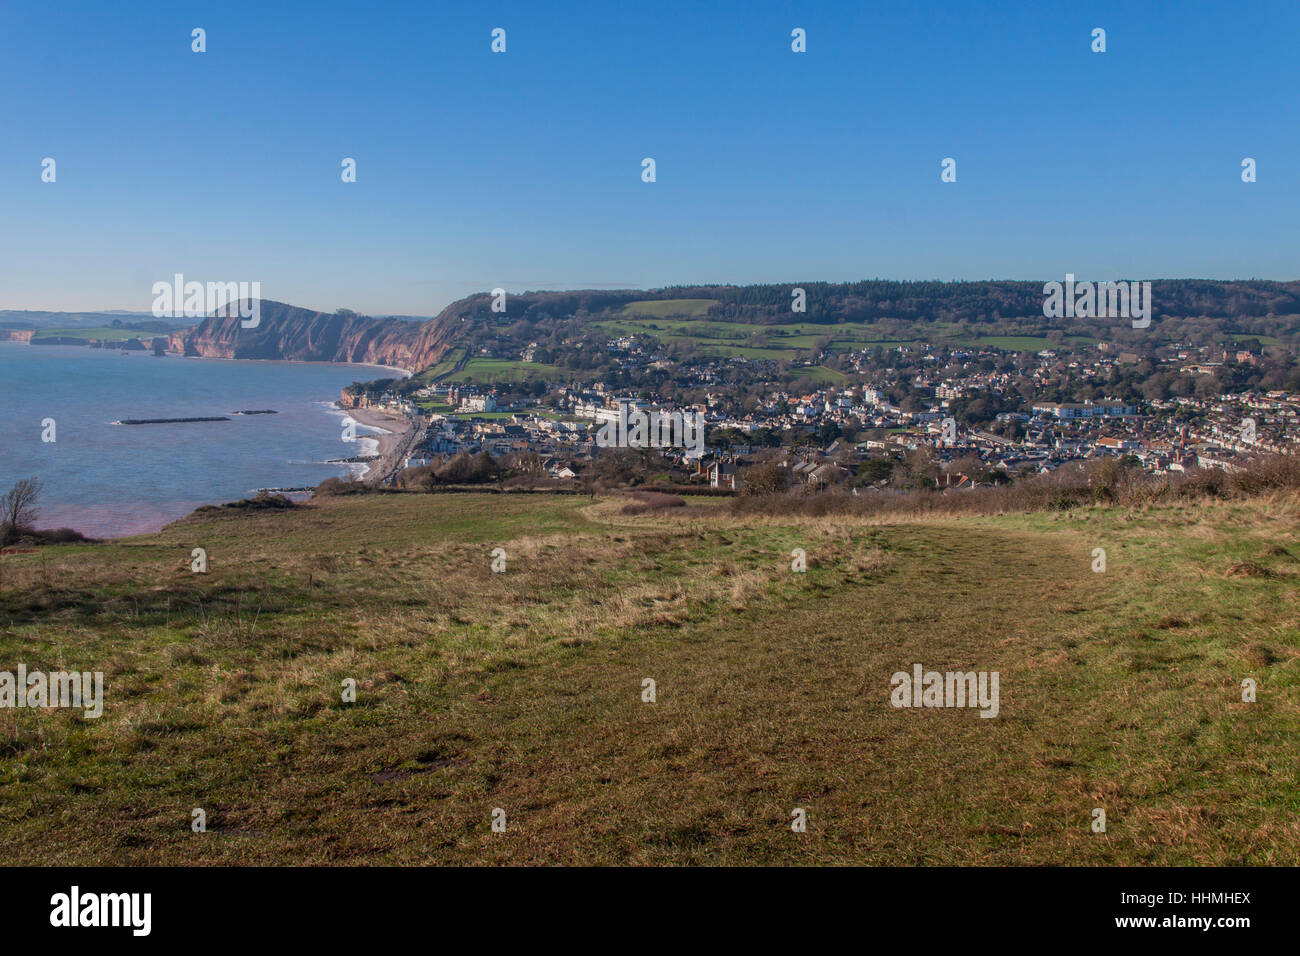 Sidmouth. View over the town and seafront at Sidmouth, Devon, from Salcombe Cliff Hill, taking in the red sandstone cliffs of the Jurassic Stock Photo